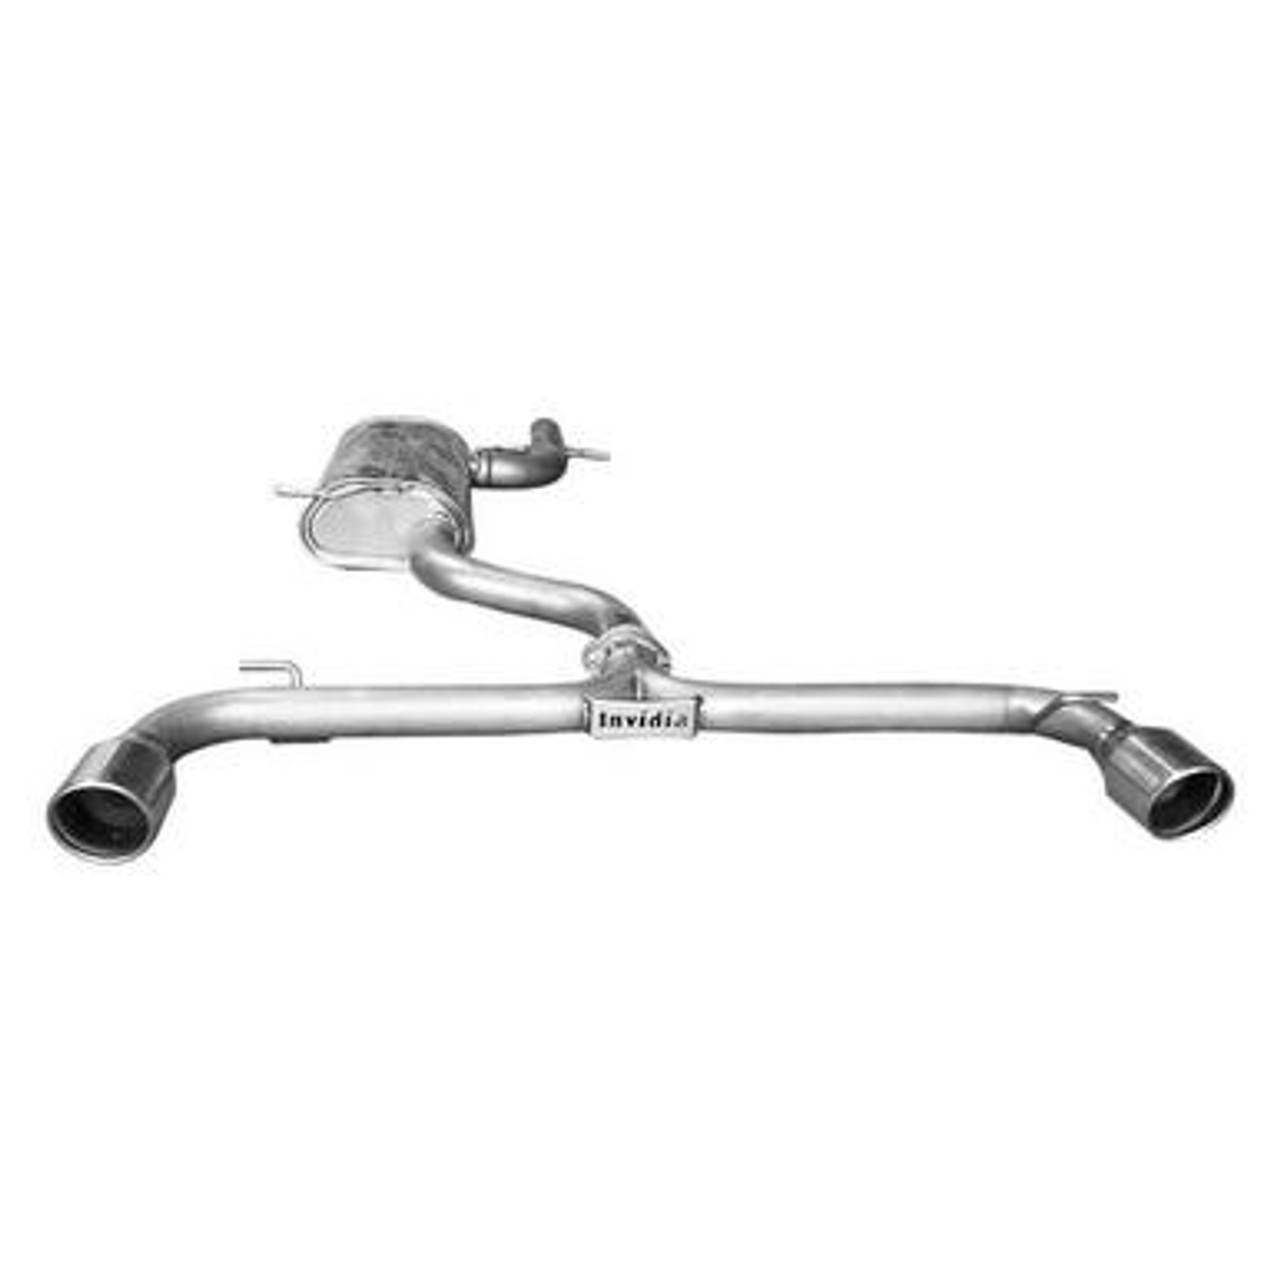 Invidia Q300 Stainless Steel Cat-Back Exhaust System with Titanium Rolled Tip | Multiple Fitments